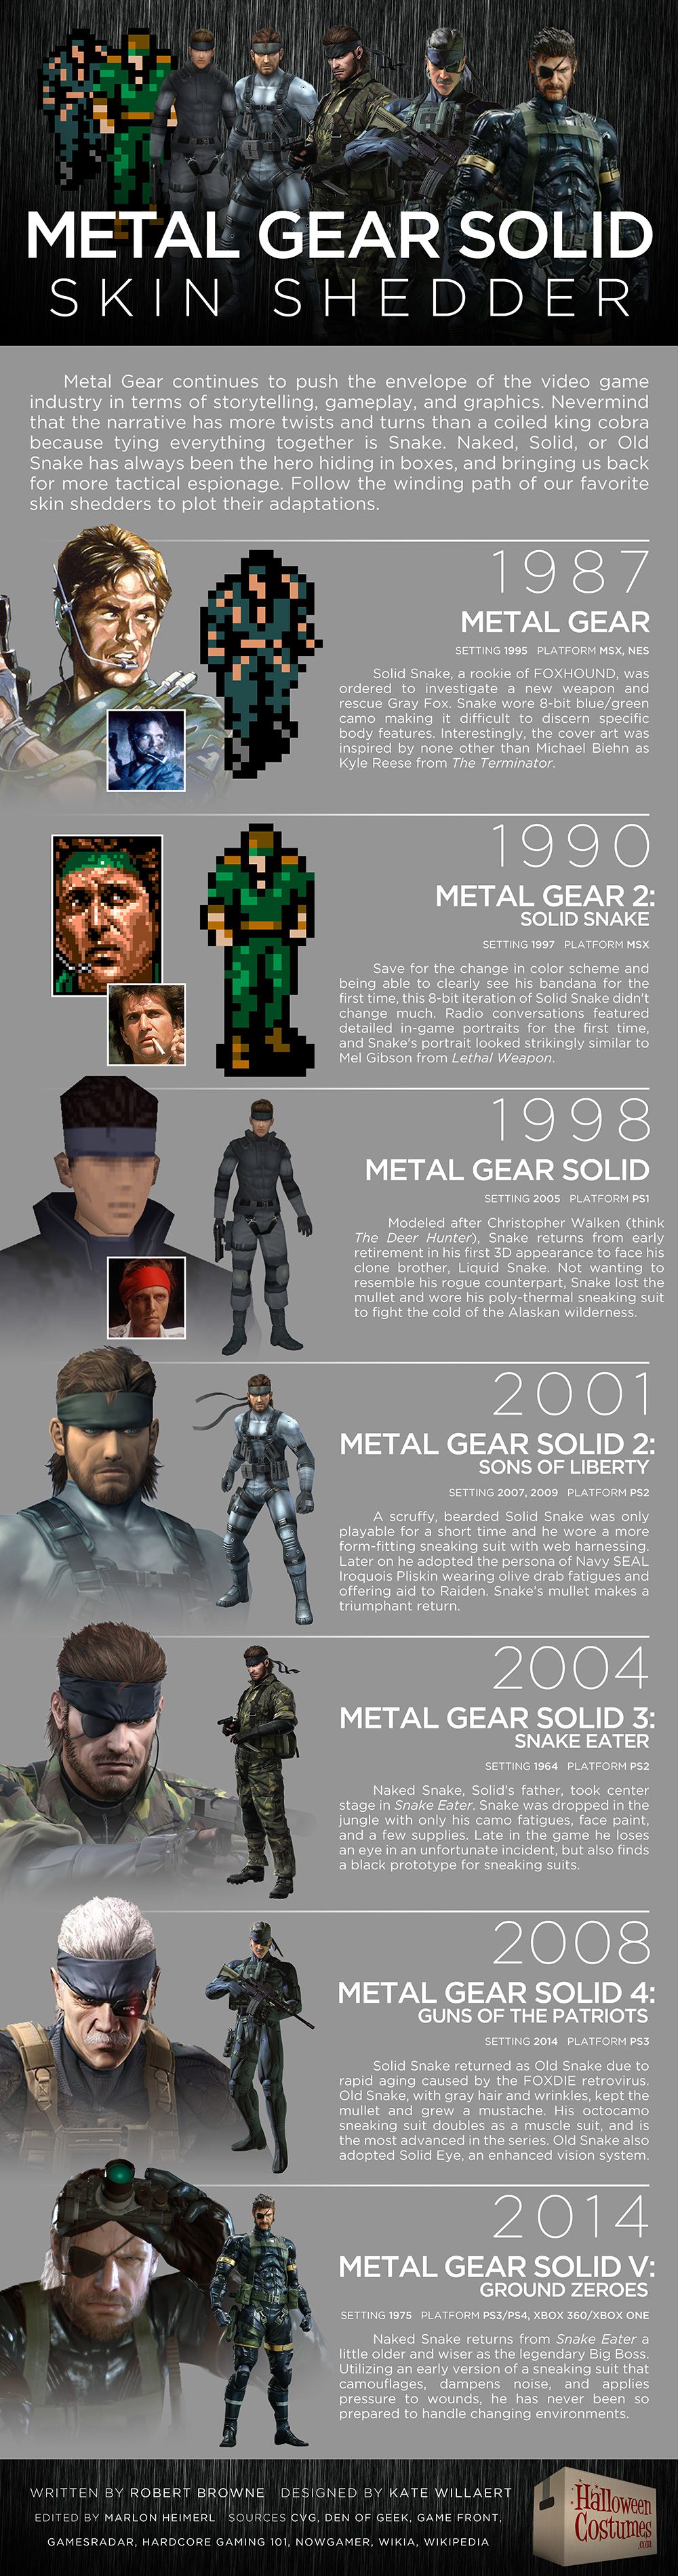 Metal-Gear-Solid-Infographic